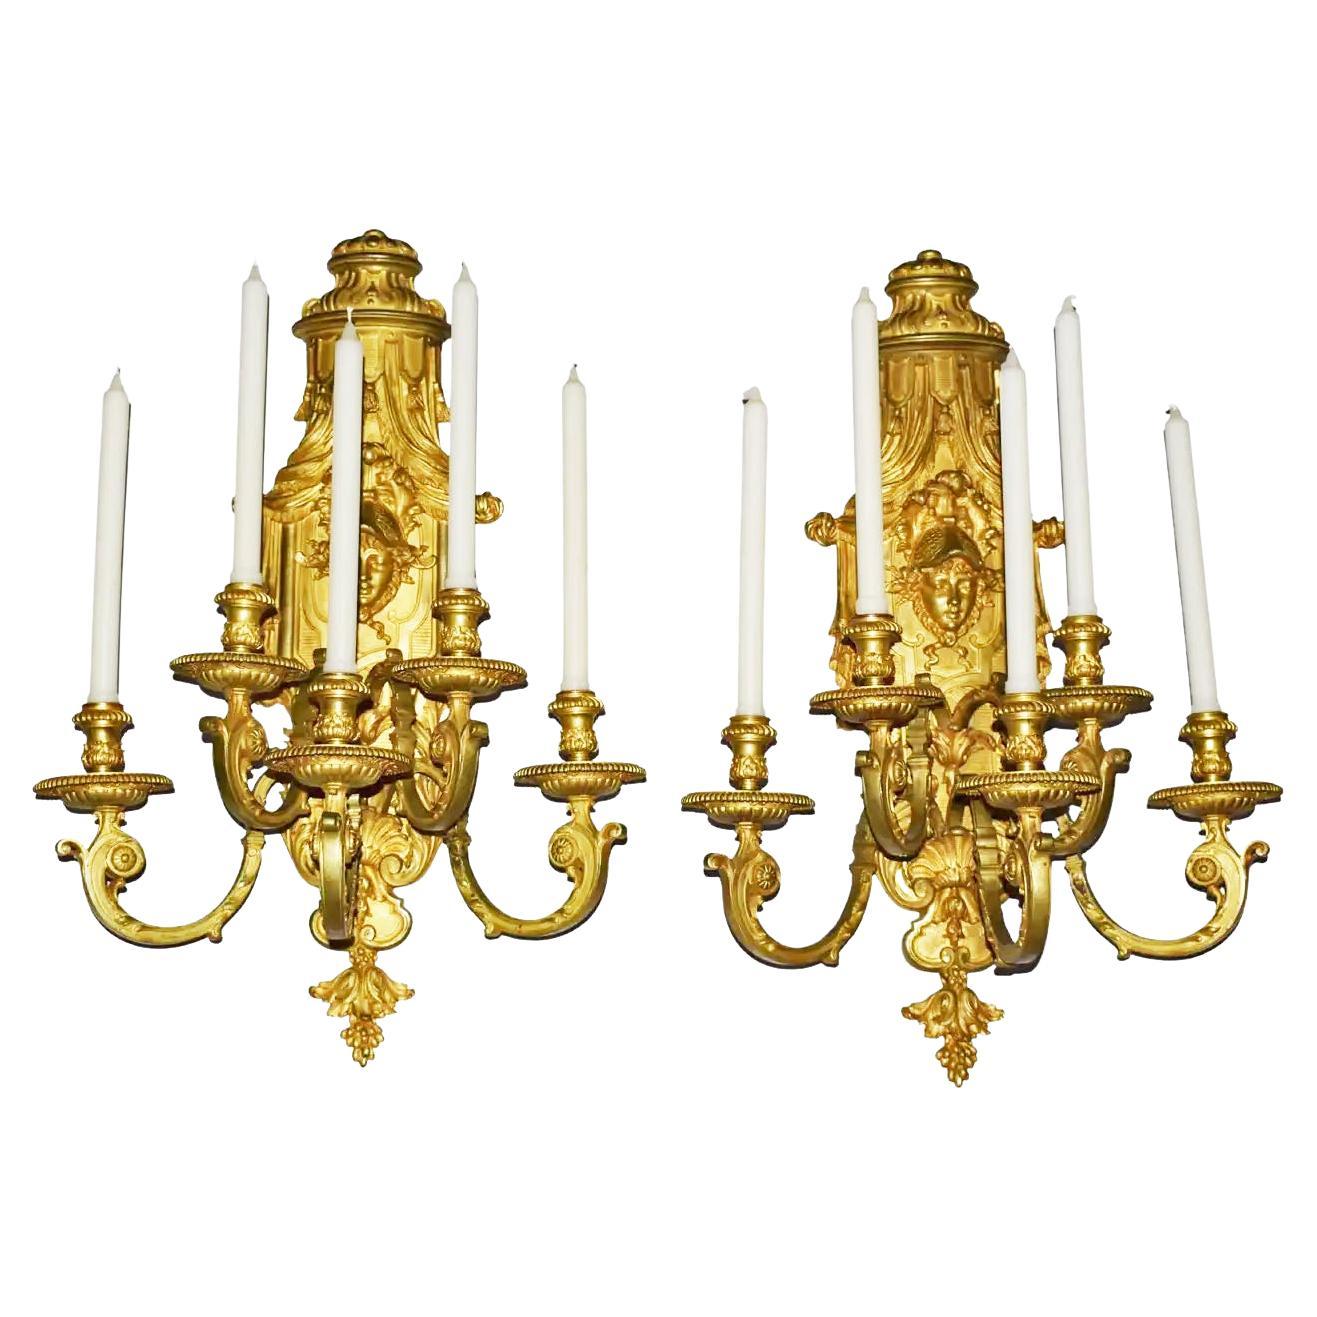 Very Fine Pair of Regency Style Gilt Bronze Wall Sconces For Sale